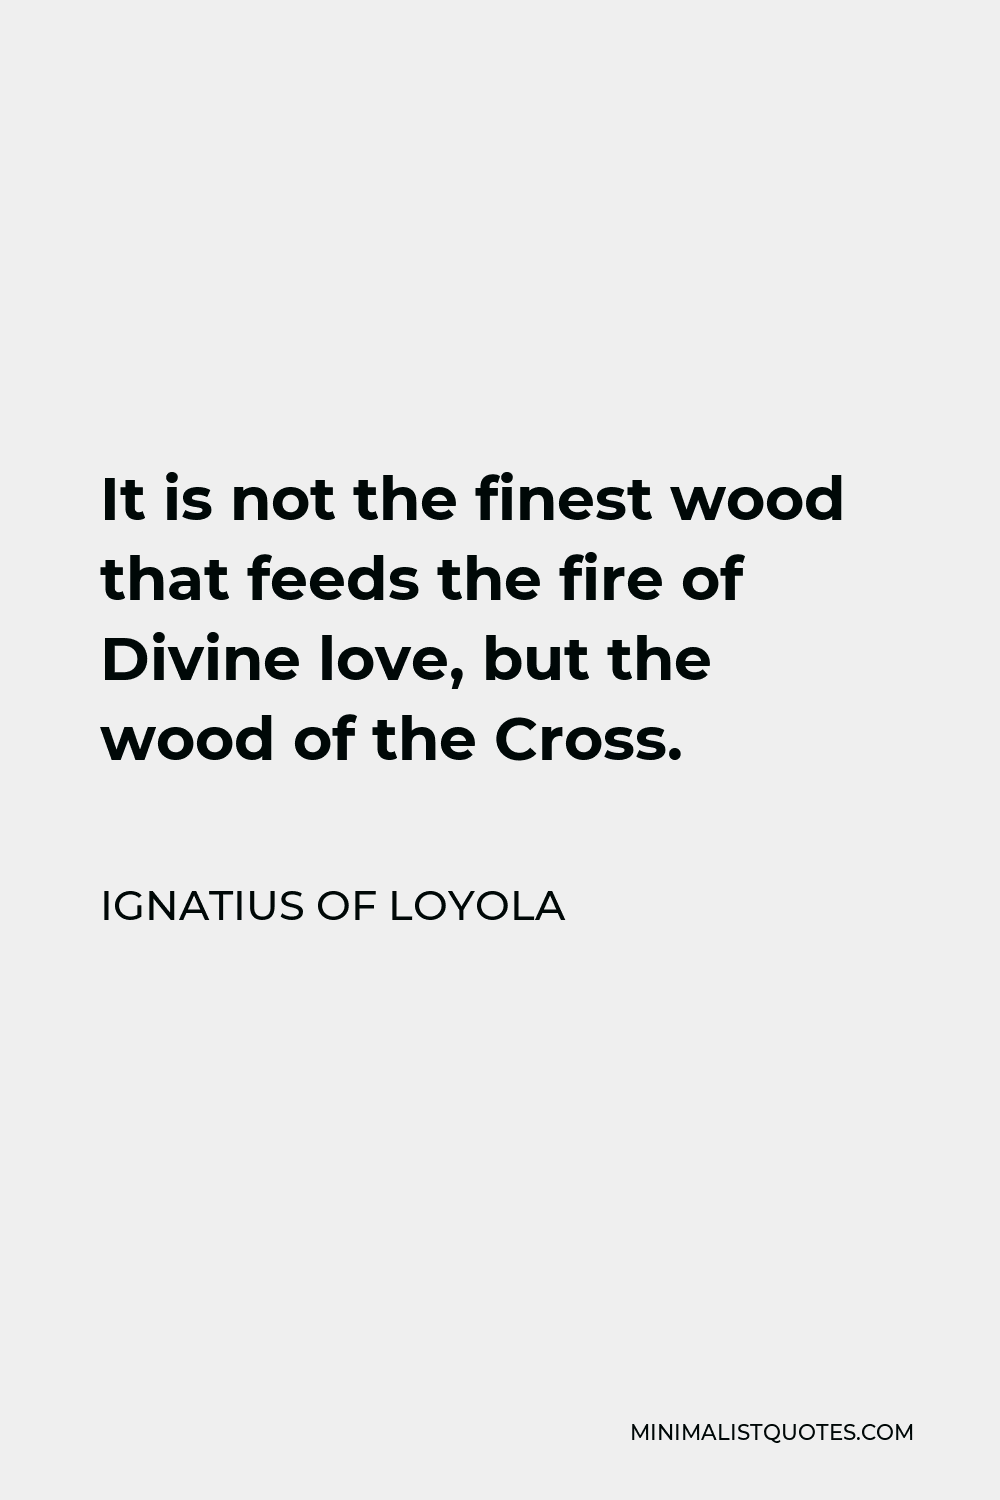 Ignatius of Loyola Quote - It is not the finest wood that feeds the fire of Divine love, but the wood of the Cross.